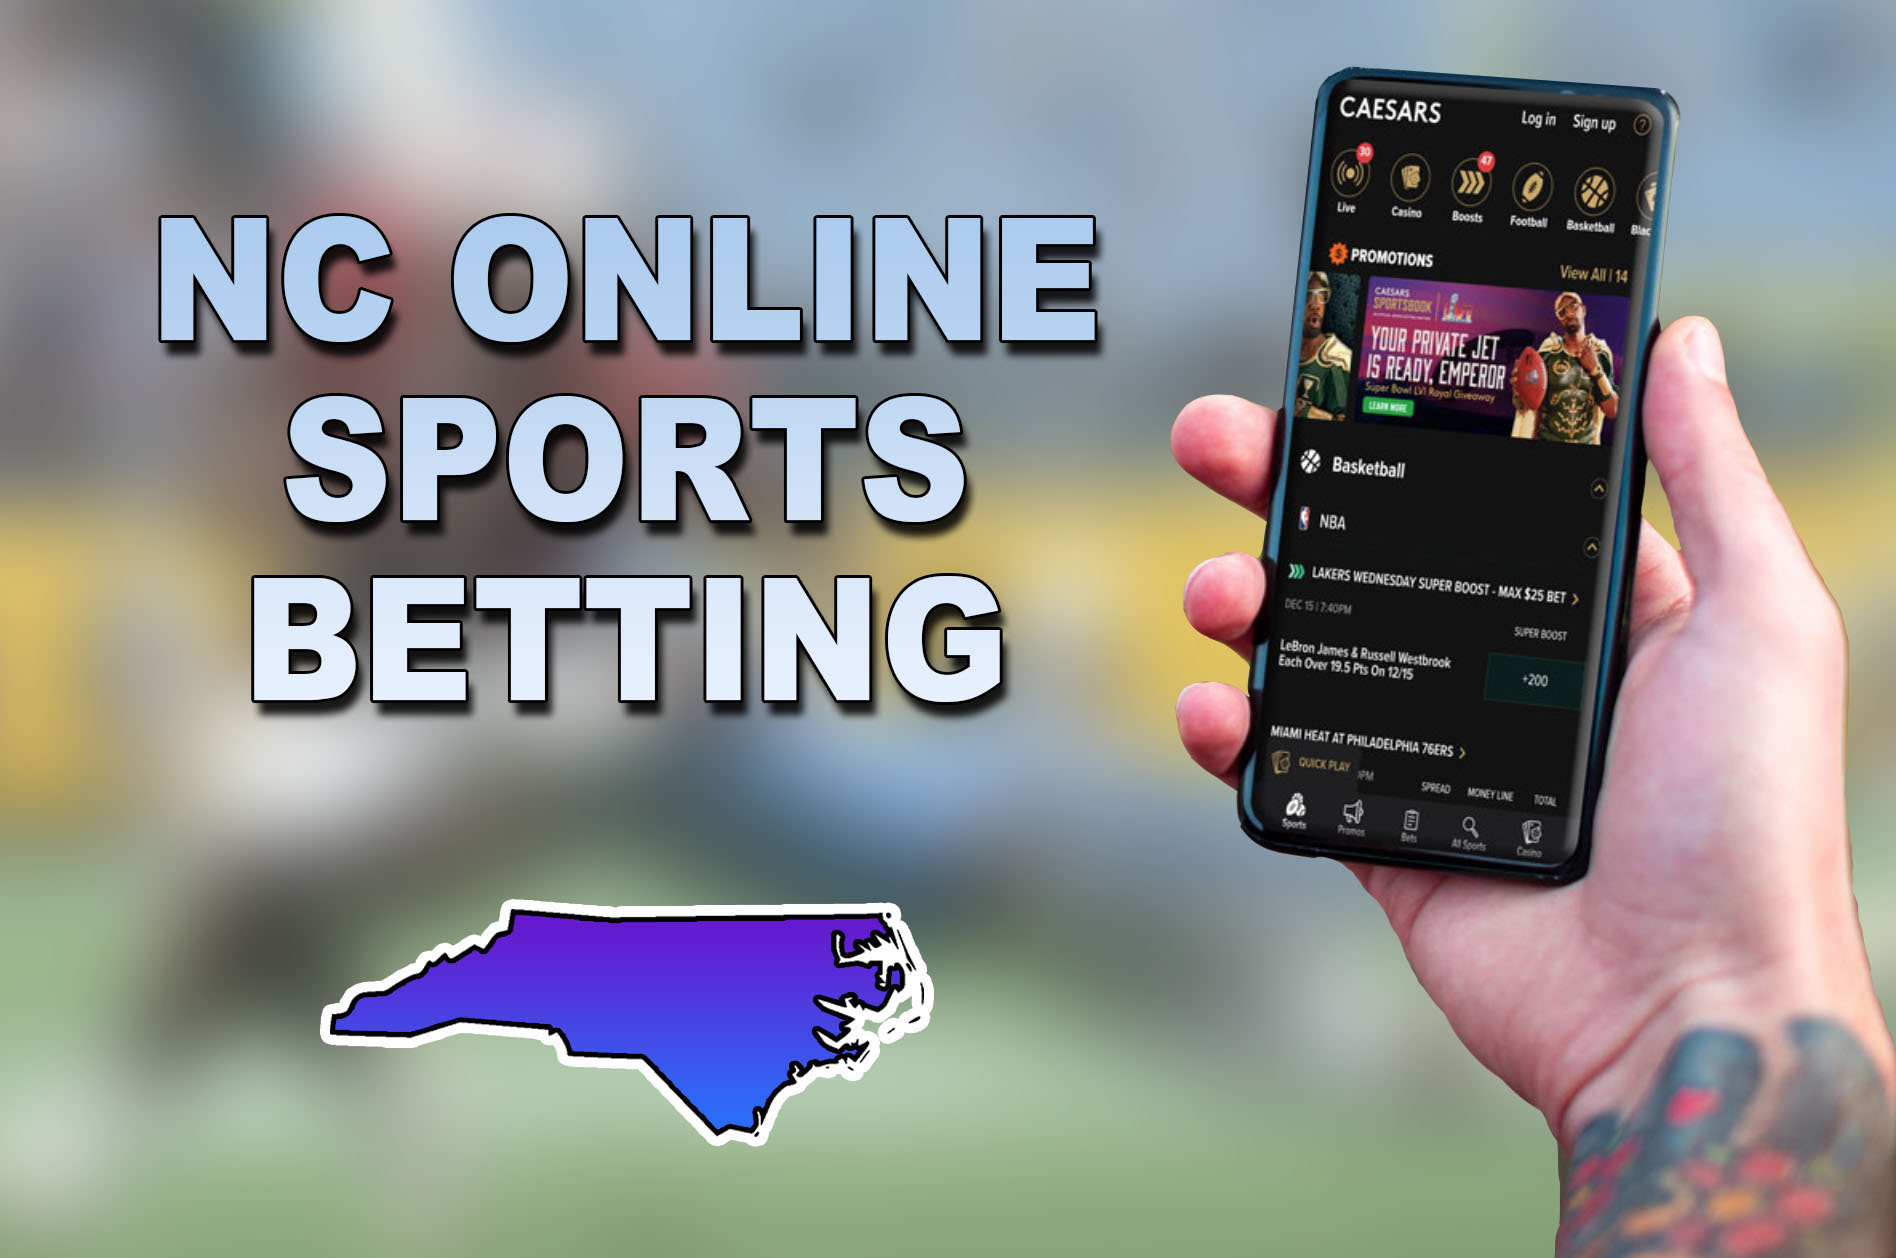 5 Surefire Ways Betting Apps Download Will Drive Your Business Into The Ground